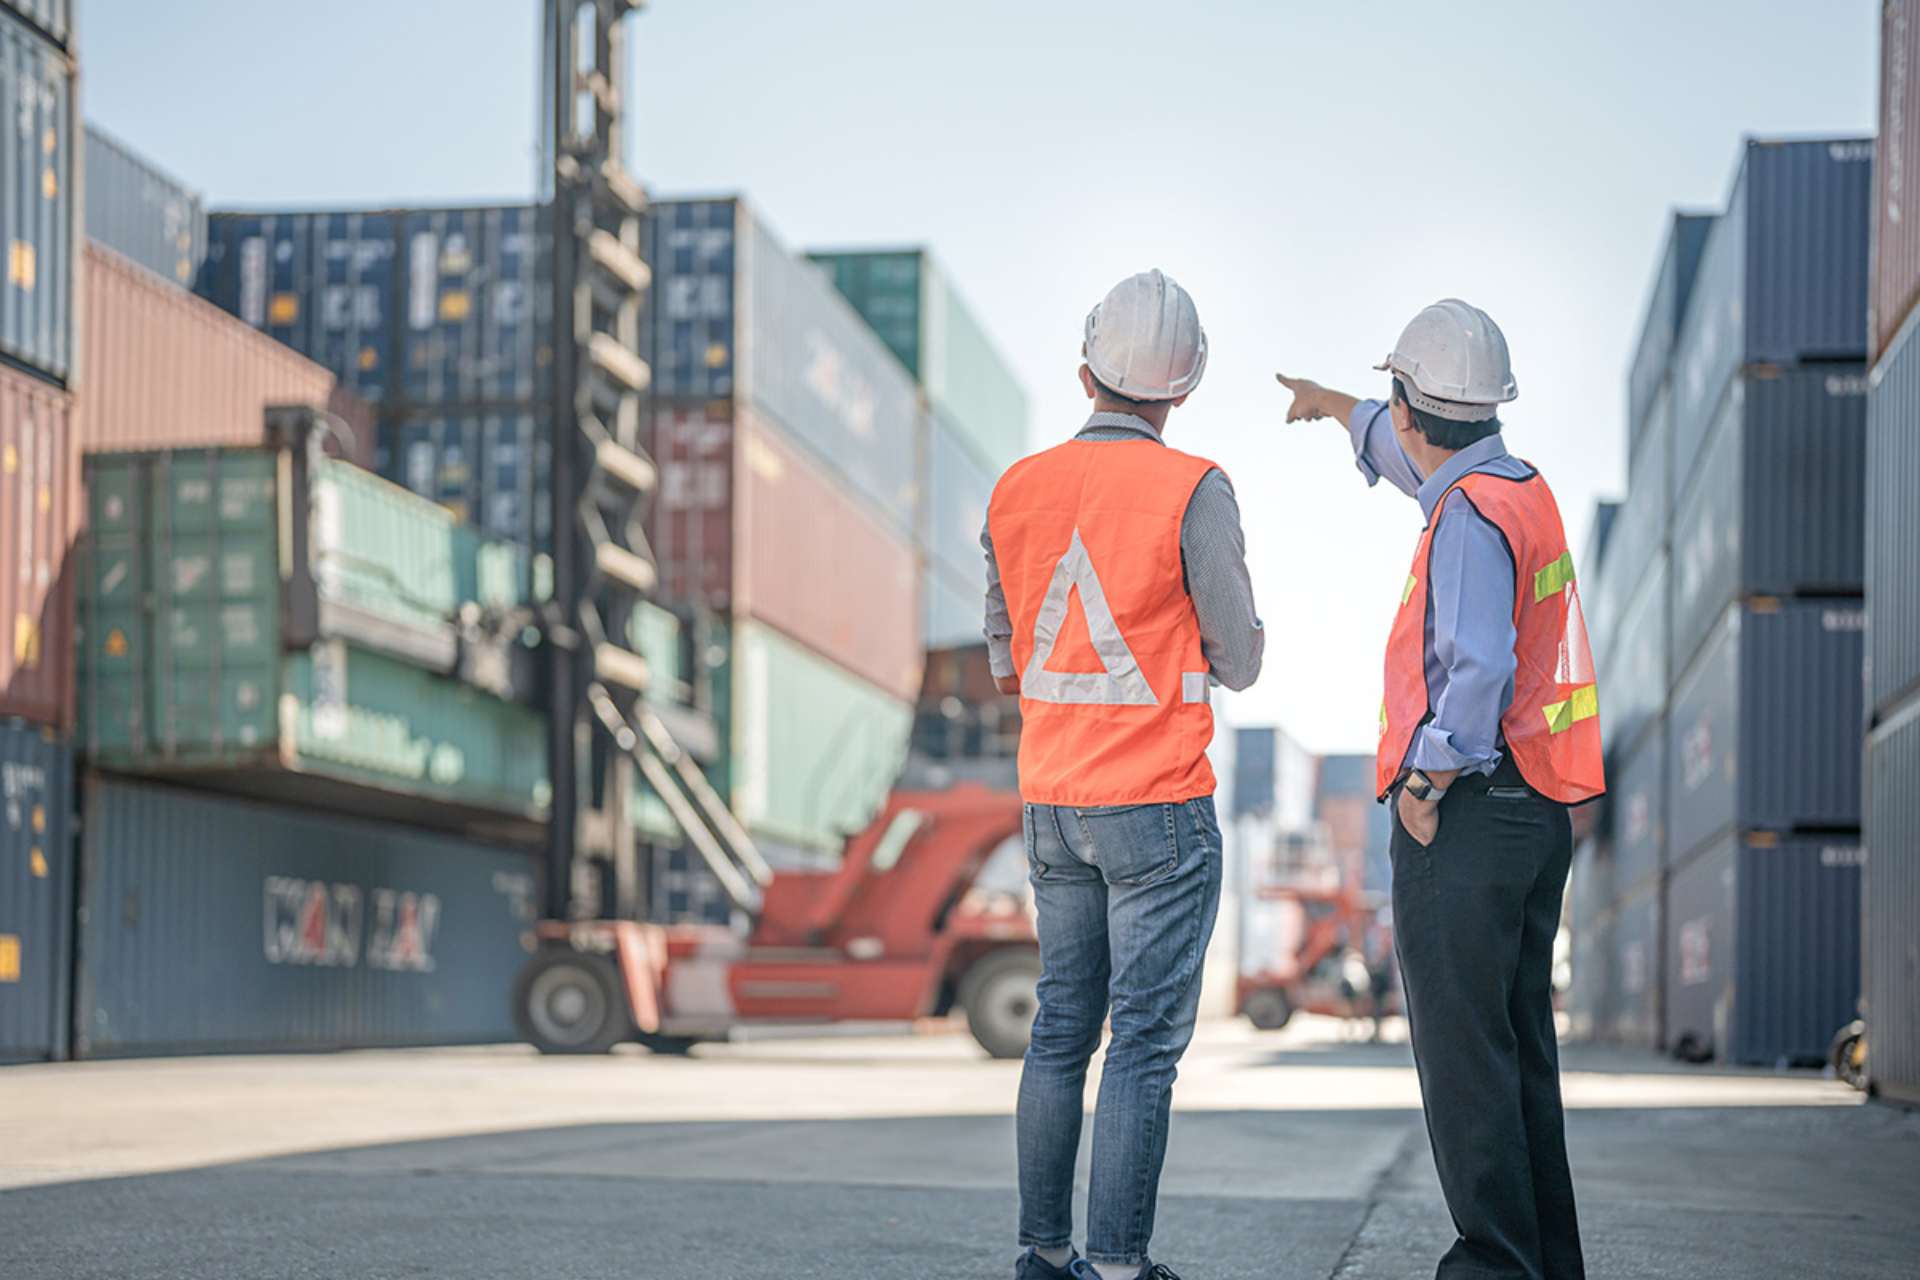 Two men in hard hats and high vis stand surrounded by shipping containers, one is pointing into the distance while the other looks on.